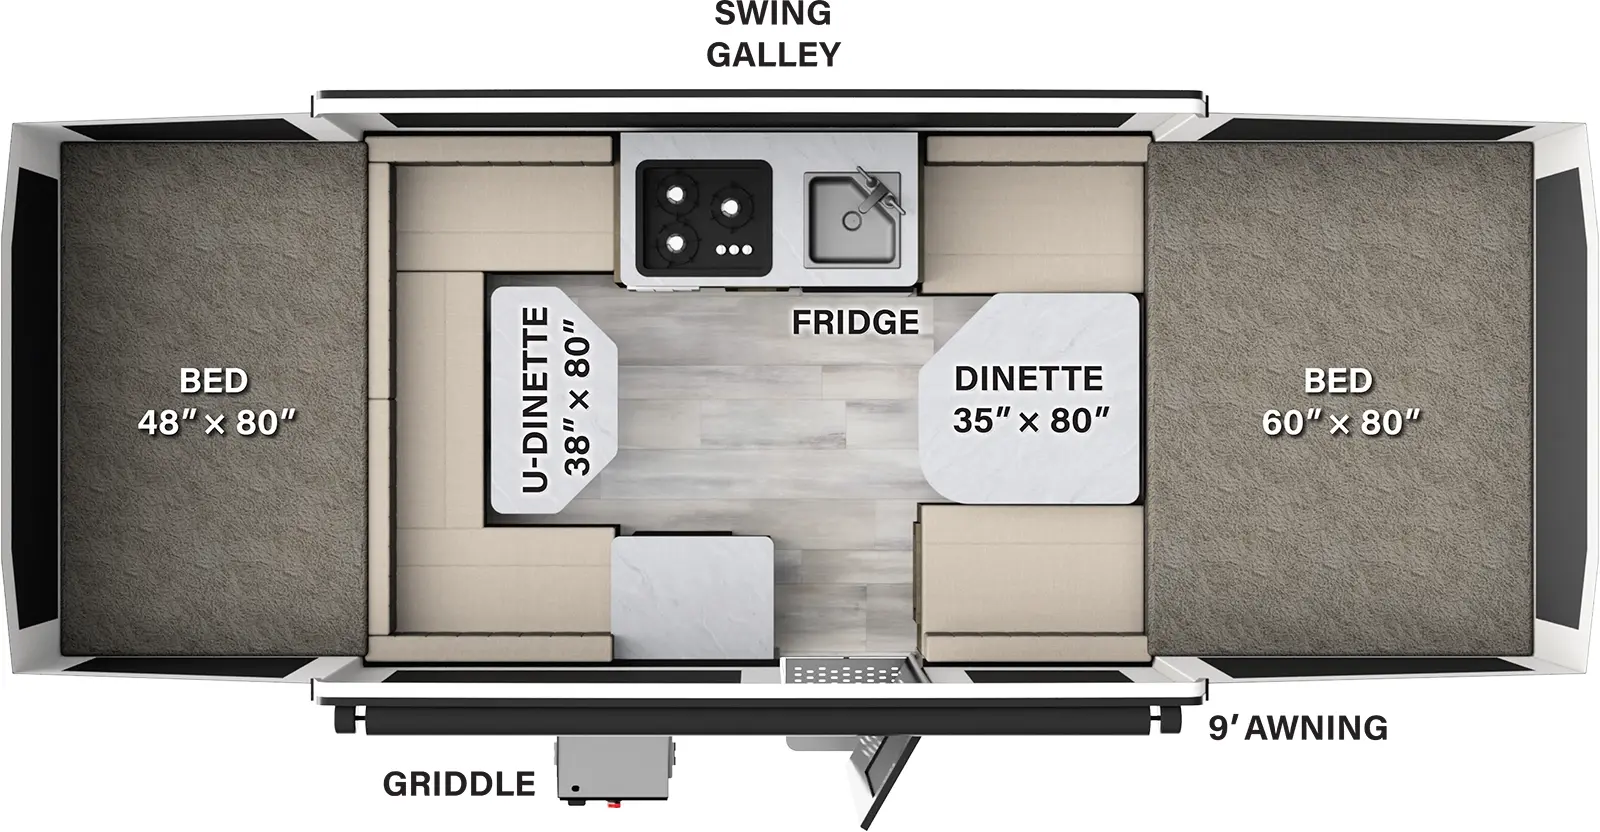 The 1980 has zero slideouts and one entry. Exterior features a griddle and a 9 foot awning. Interior layout front to back: front tent bed; dinette; off-door side swing galley with sink, cooktop and refrigerator; door side entry and cabinet; u-dinette; rear tent bed.